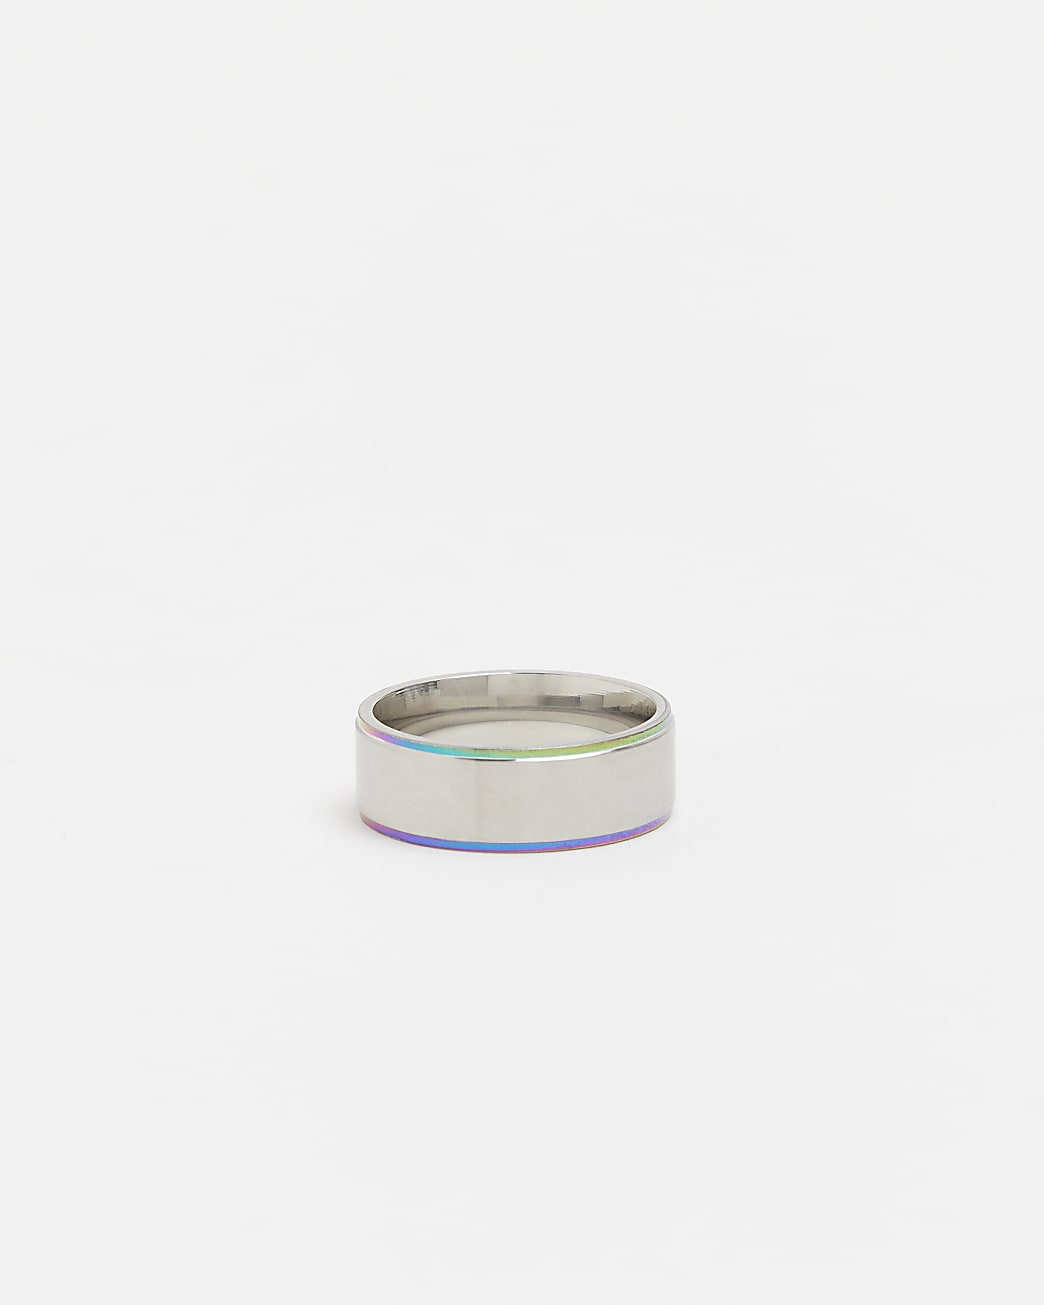 Silver stainless steel iridescent band ring